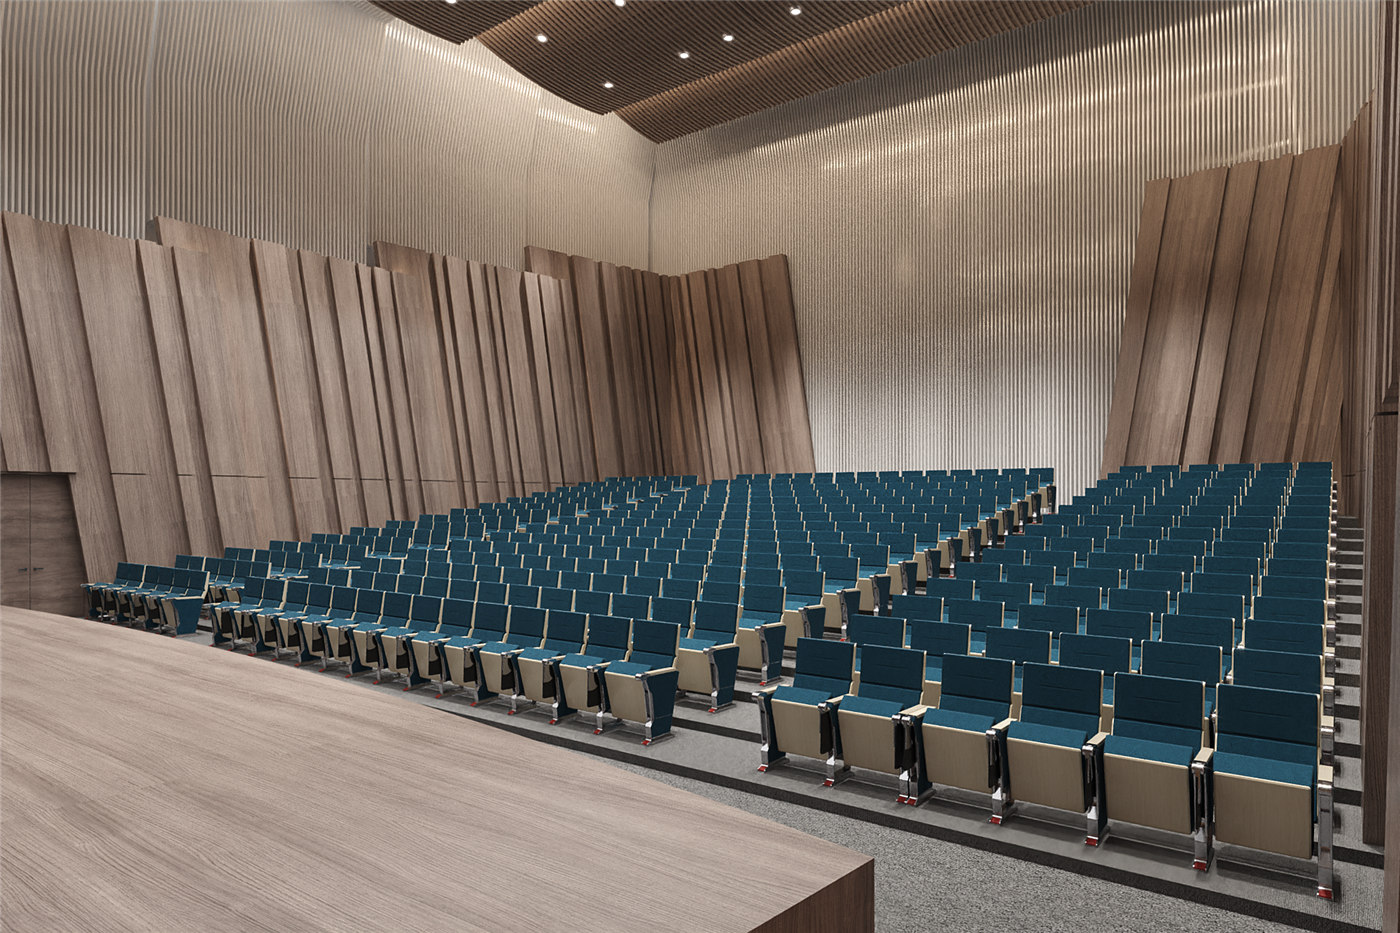 Enhance the Aesthetics of Your Venue with Stylish Auditorium Seating from Leading Manufacturers40